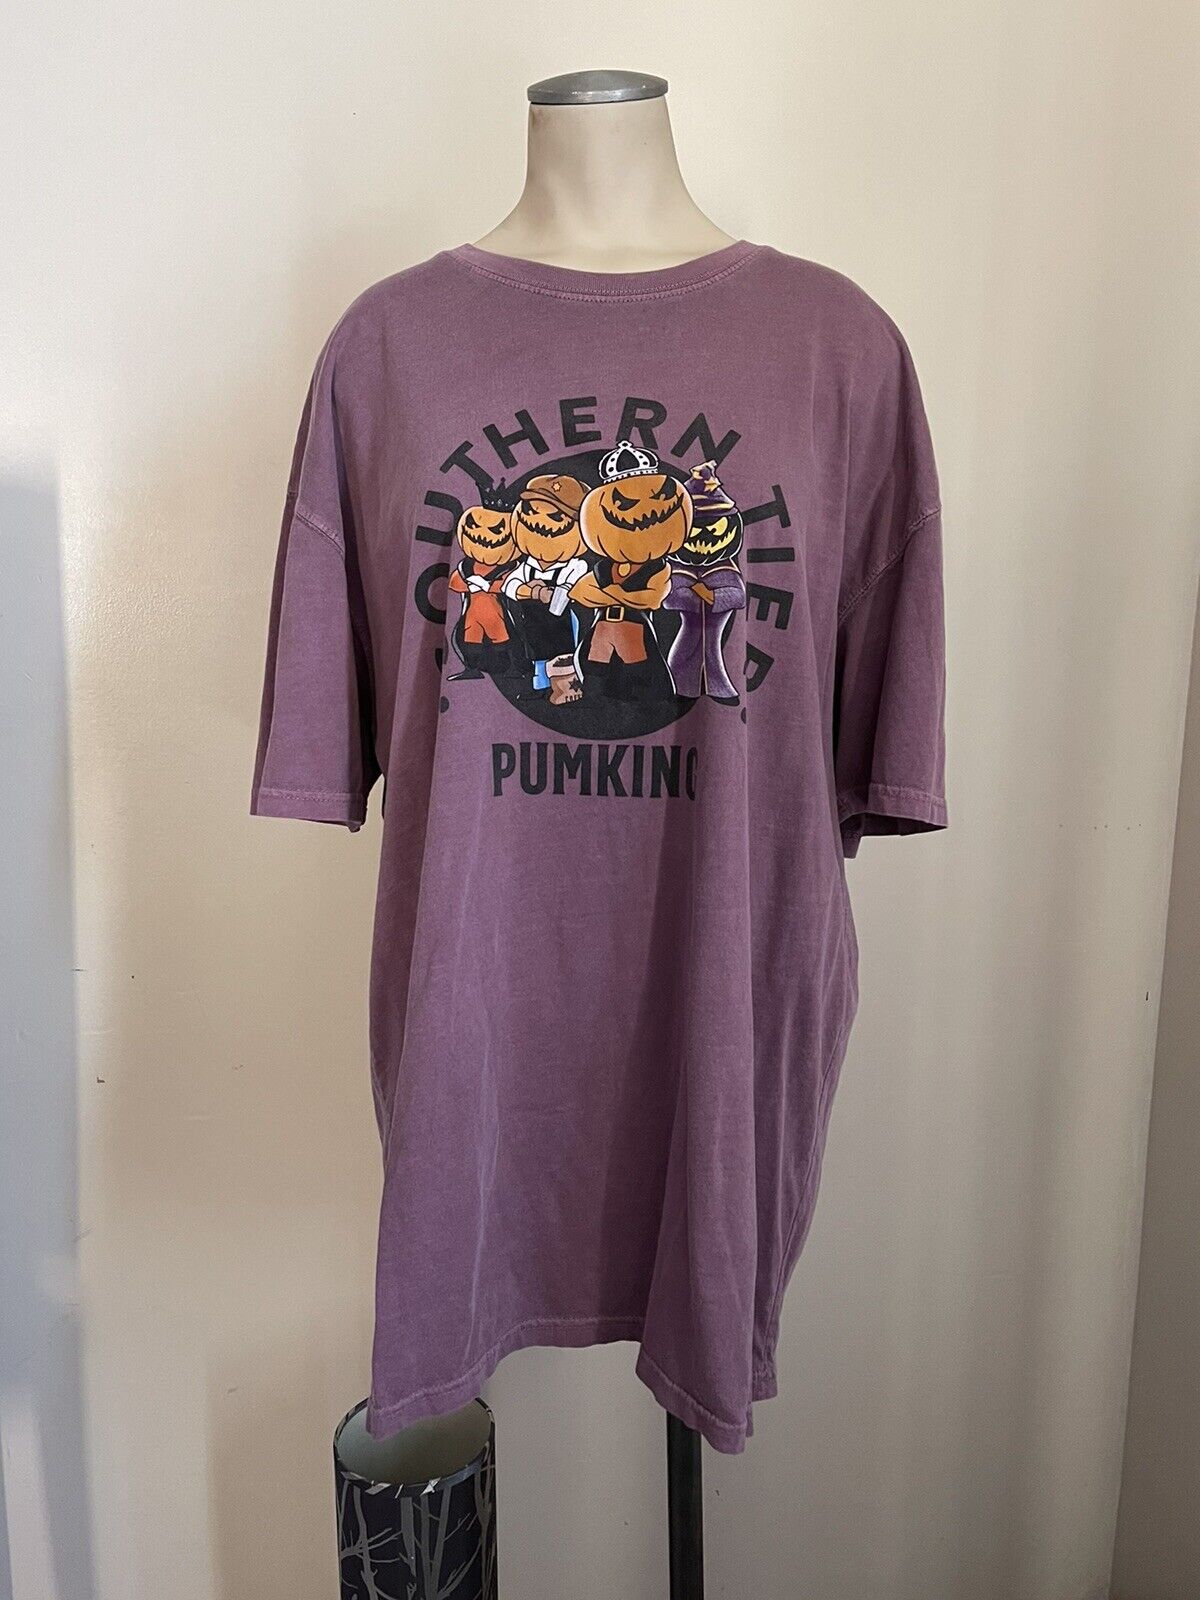 Southern Tier Brewing Company Pumking T-shirt Size Xl Unisex